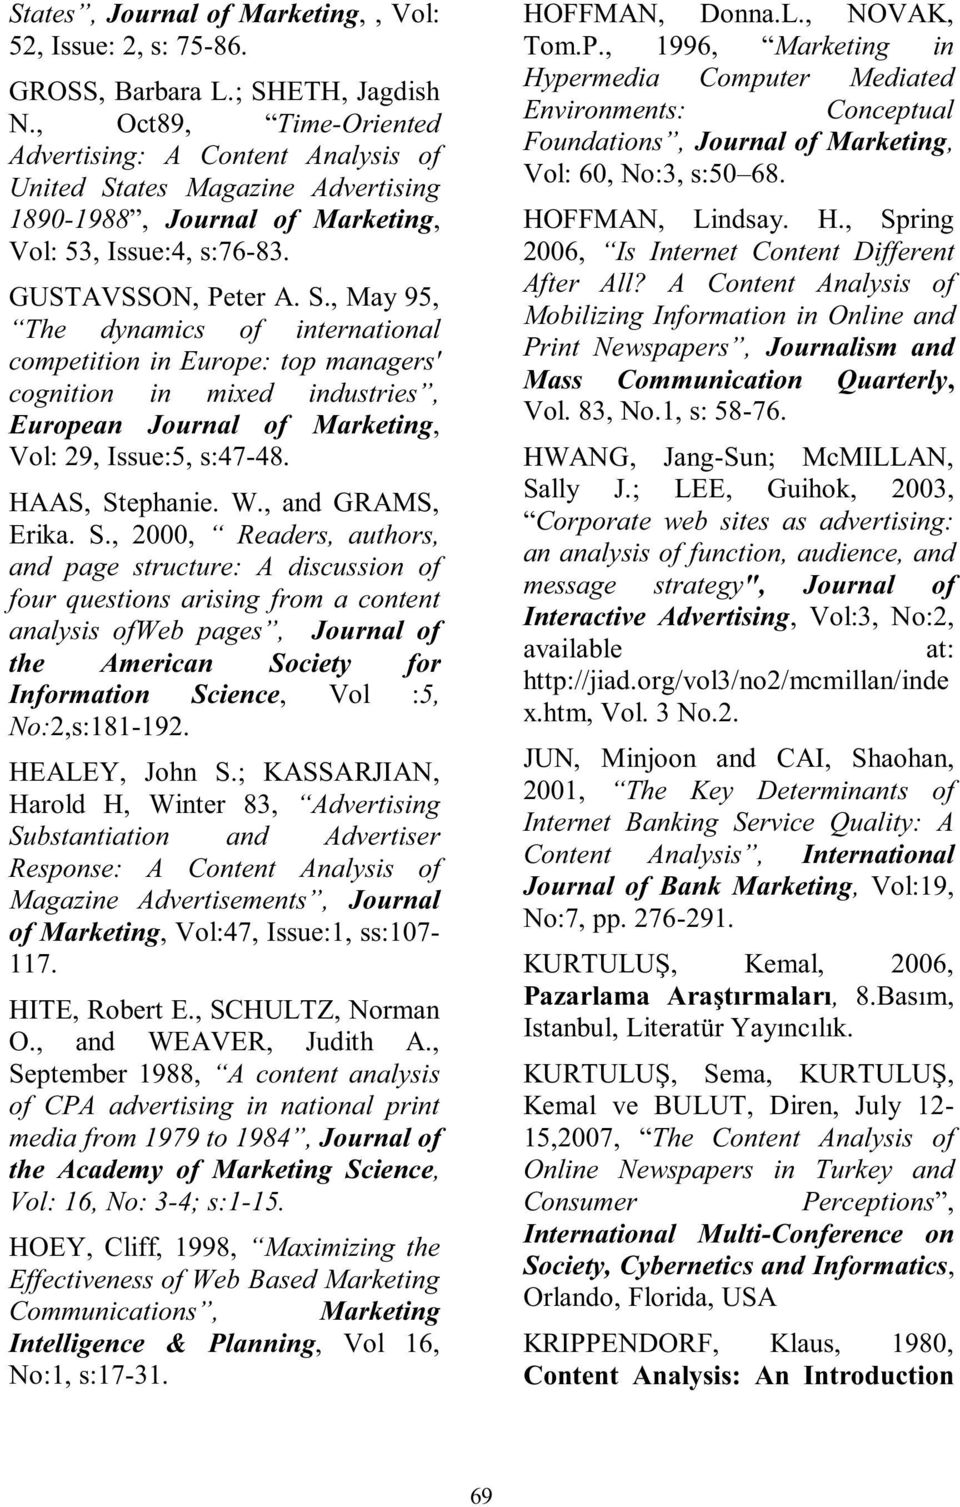 ates Magazine Advertising 1890-1988, Journal of Marketing, Vol: 53, Issue:4, s:76-83. GUSTAVSSON, Peter A. S.